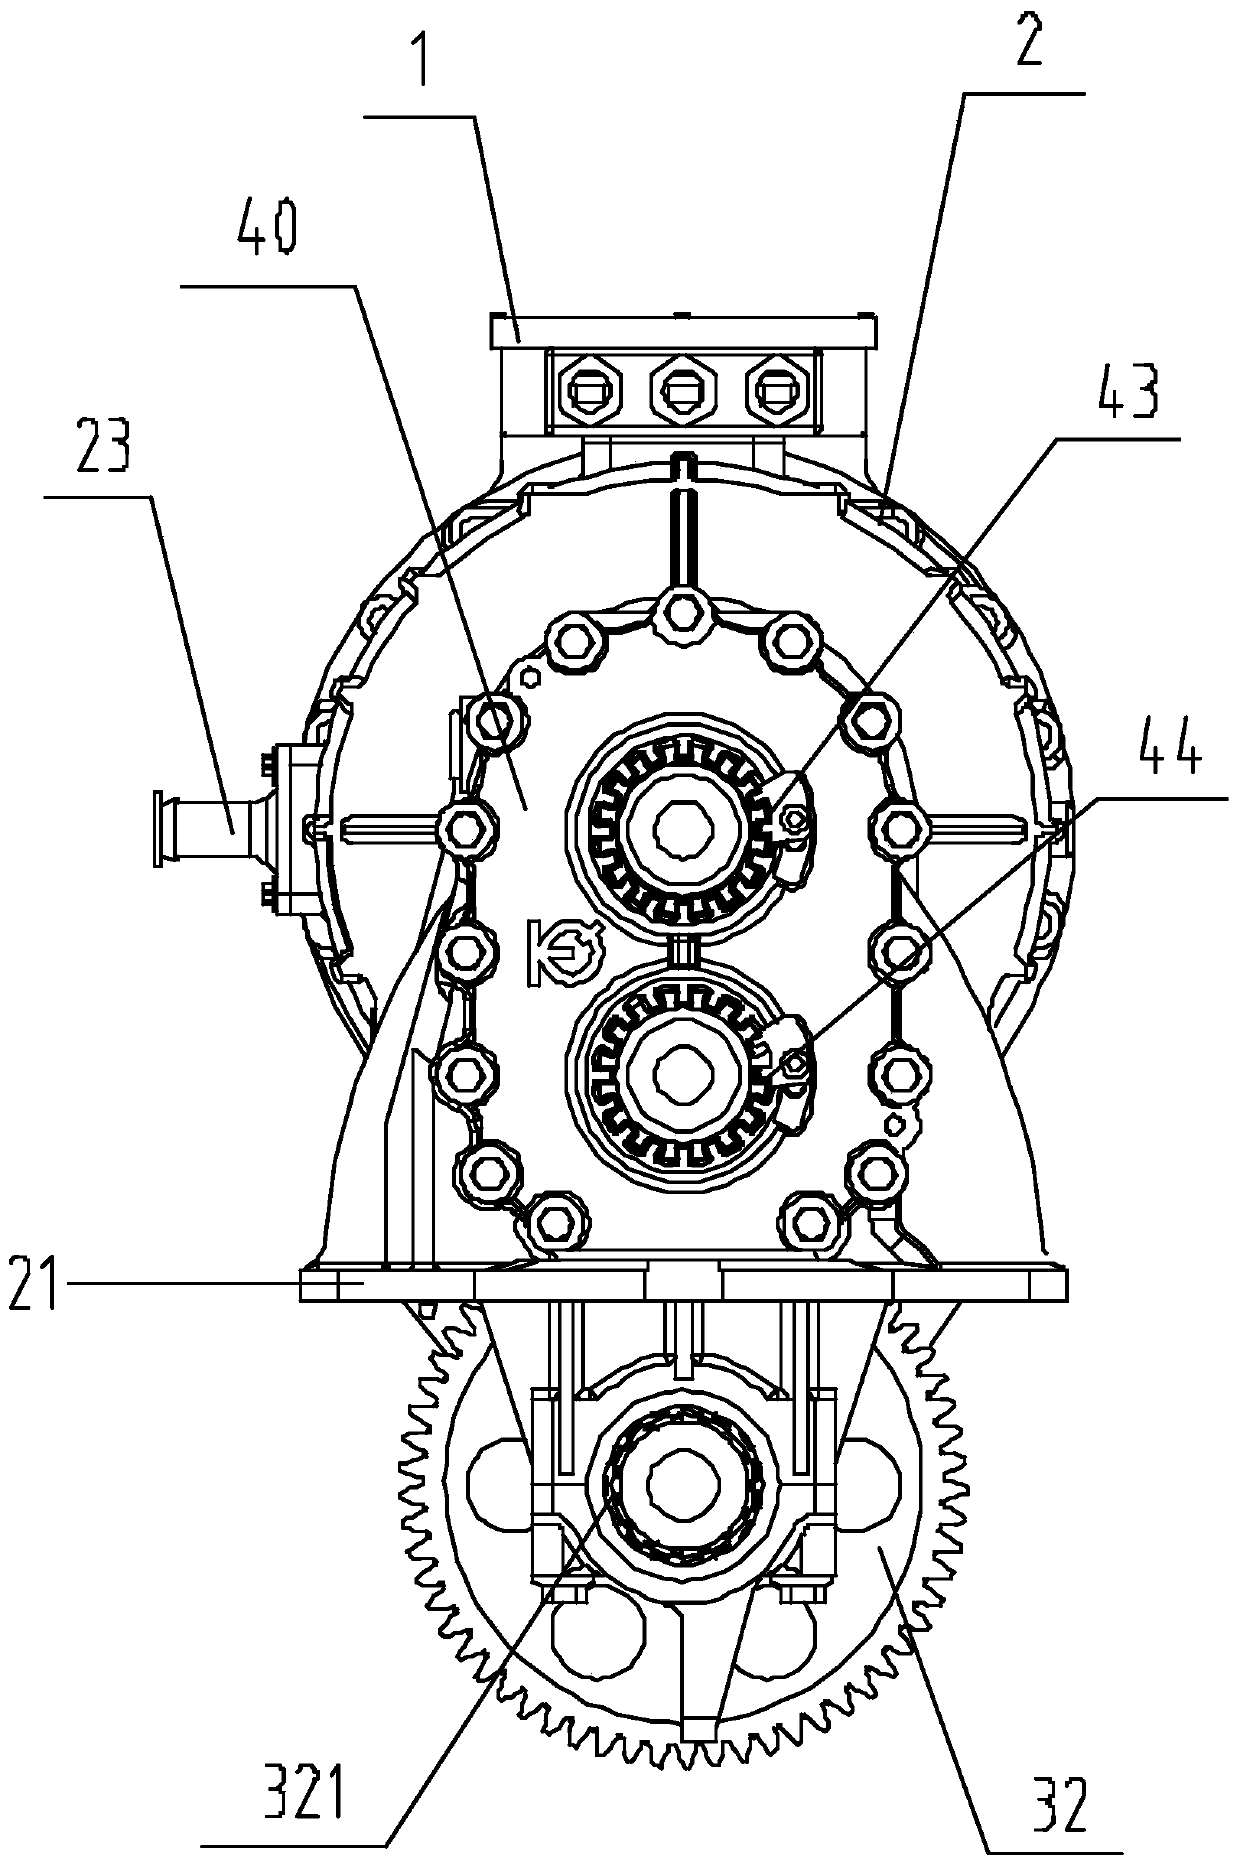 Motor integrated type main speed reducer assembly